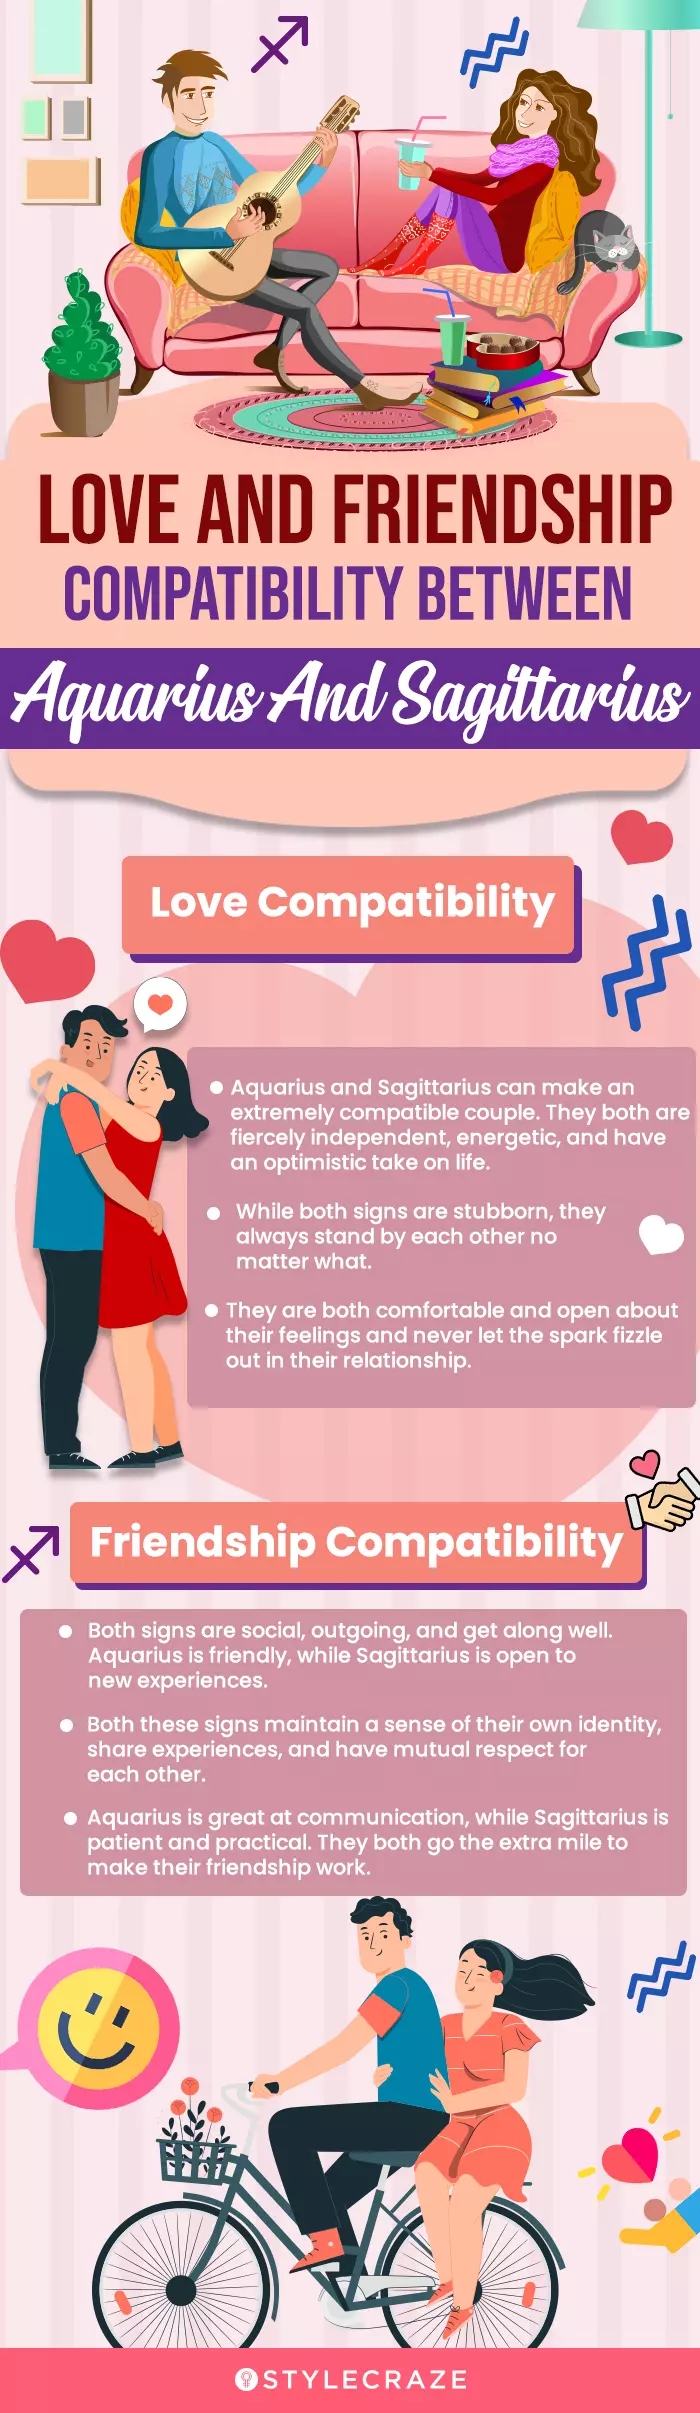 love and friendship compatibility between aquarius and sagittarius (infographic)